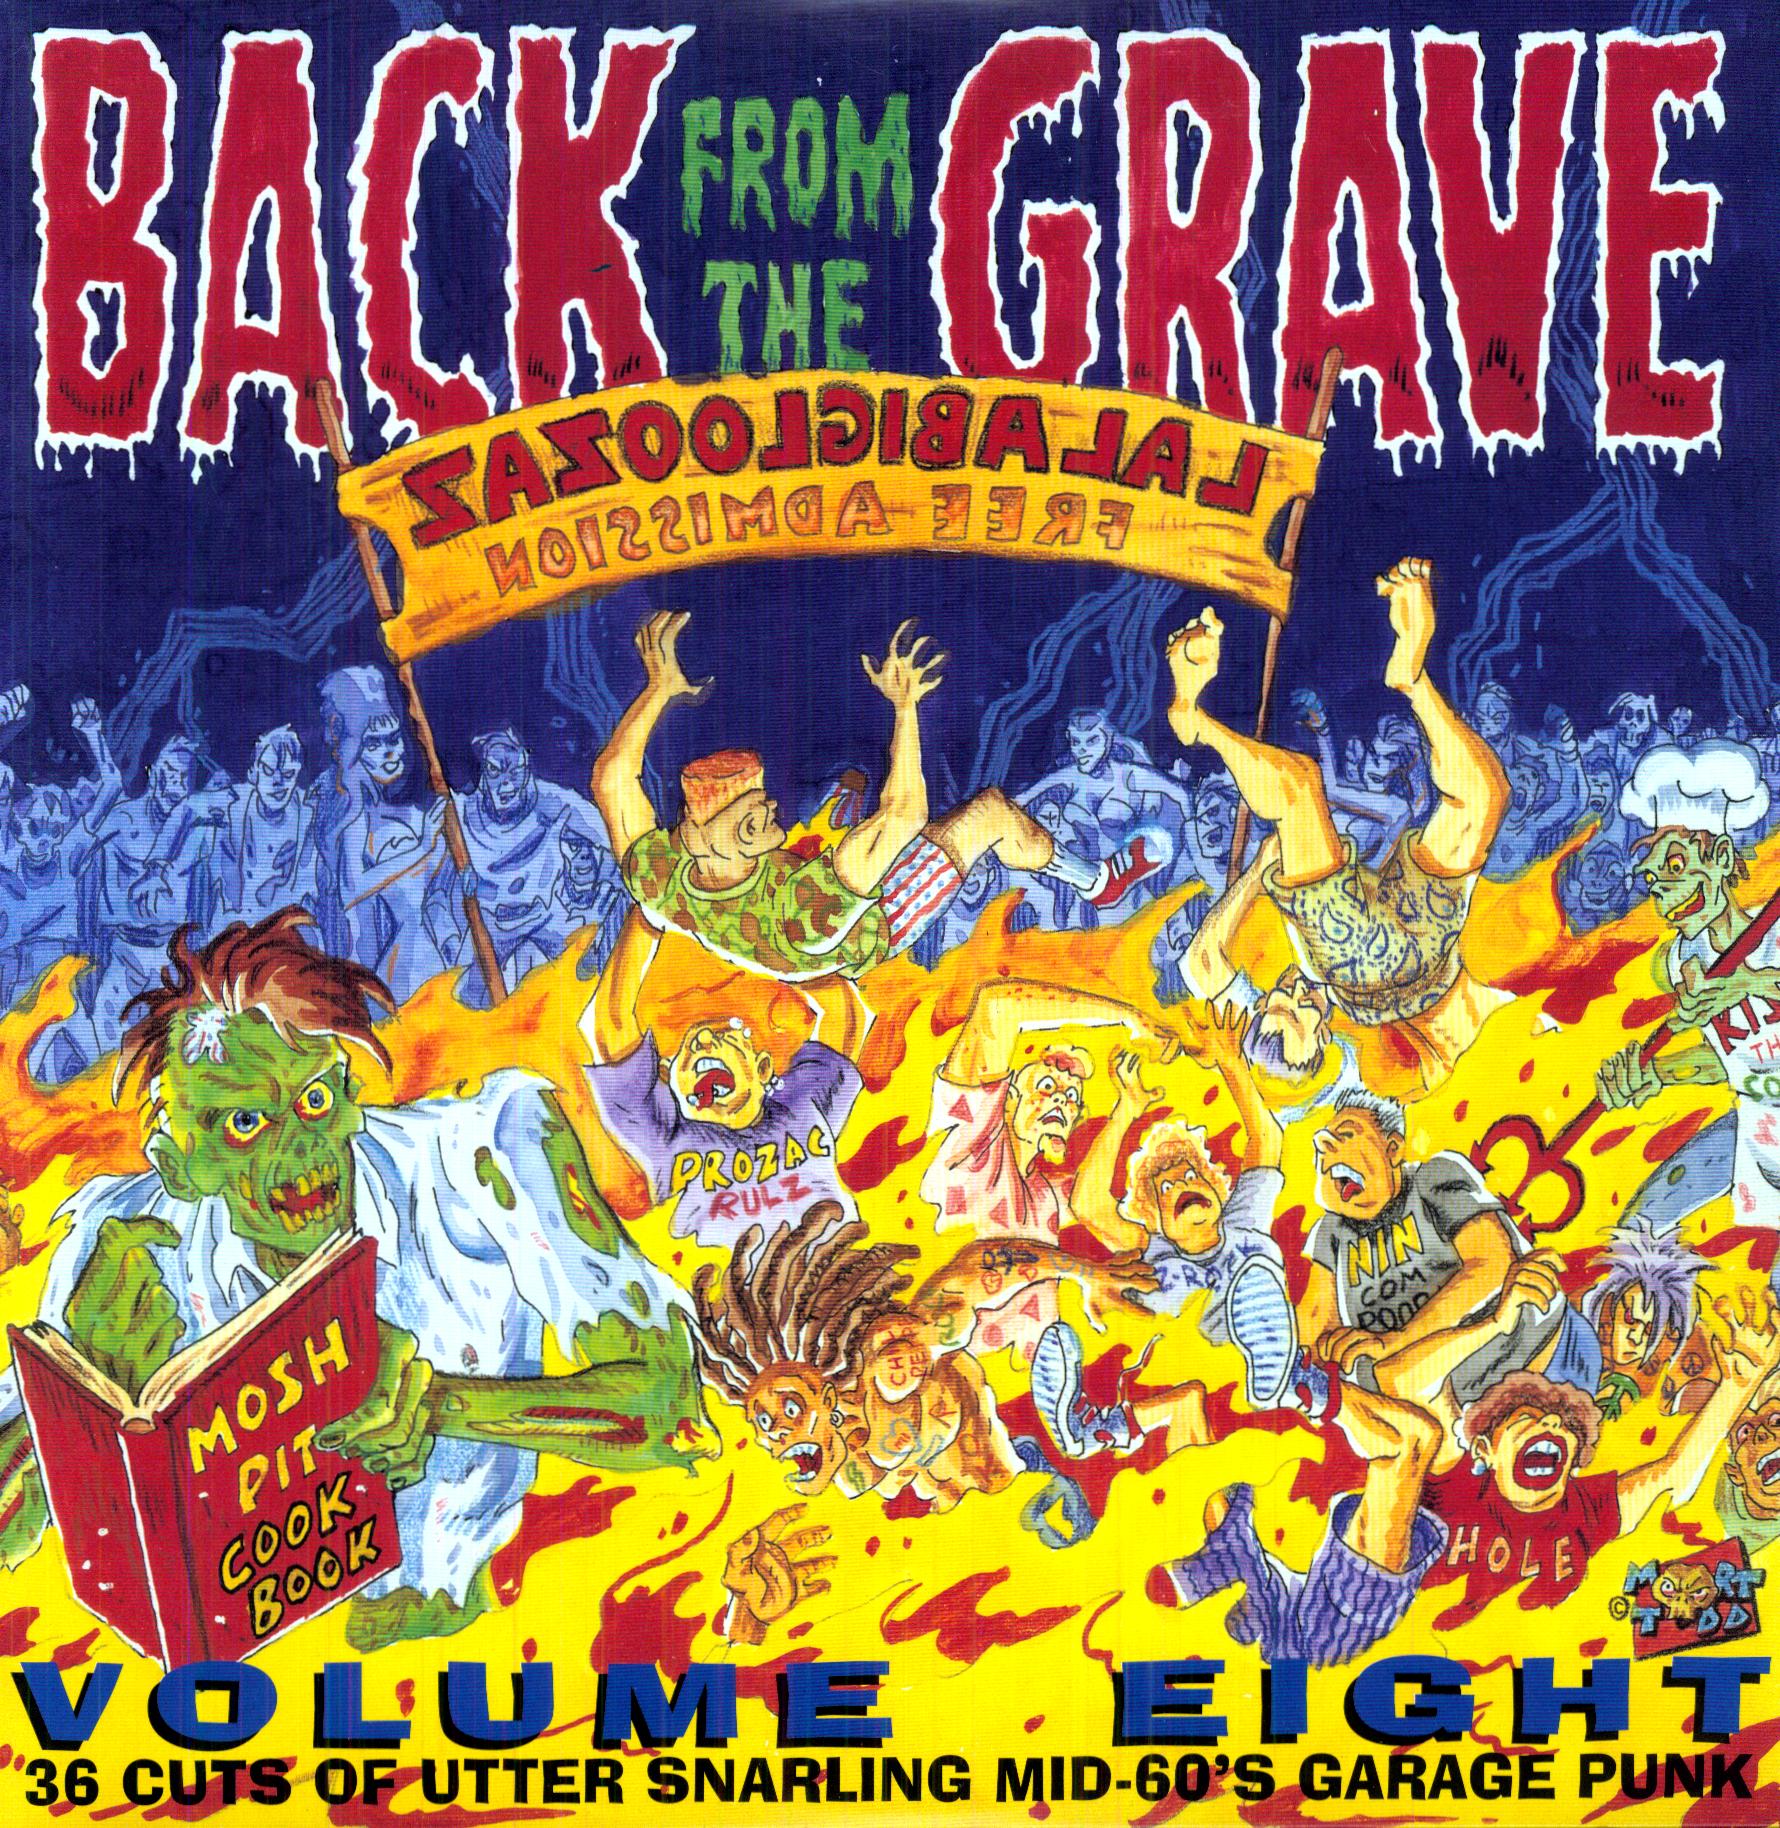 BACK FROM THE GRAVE 8 / VARIOUS